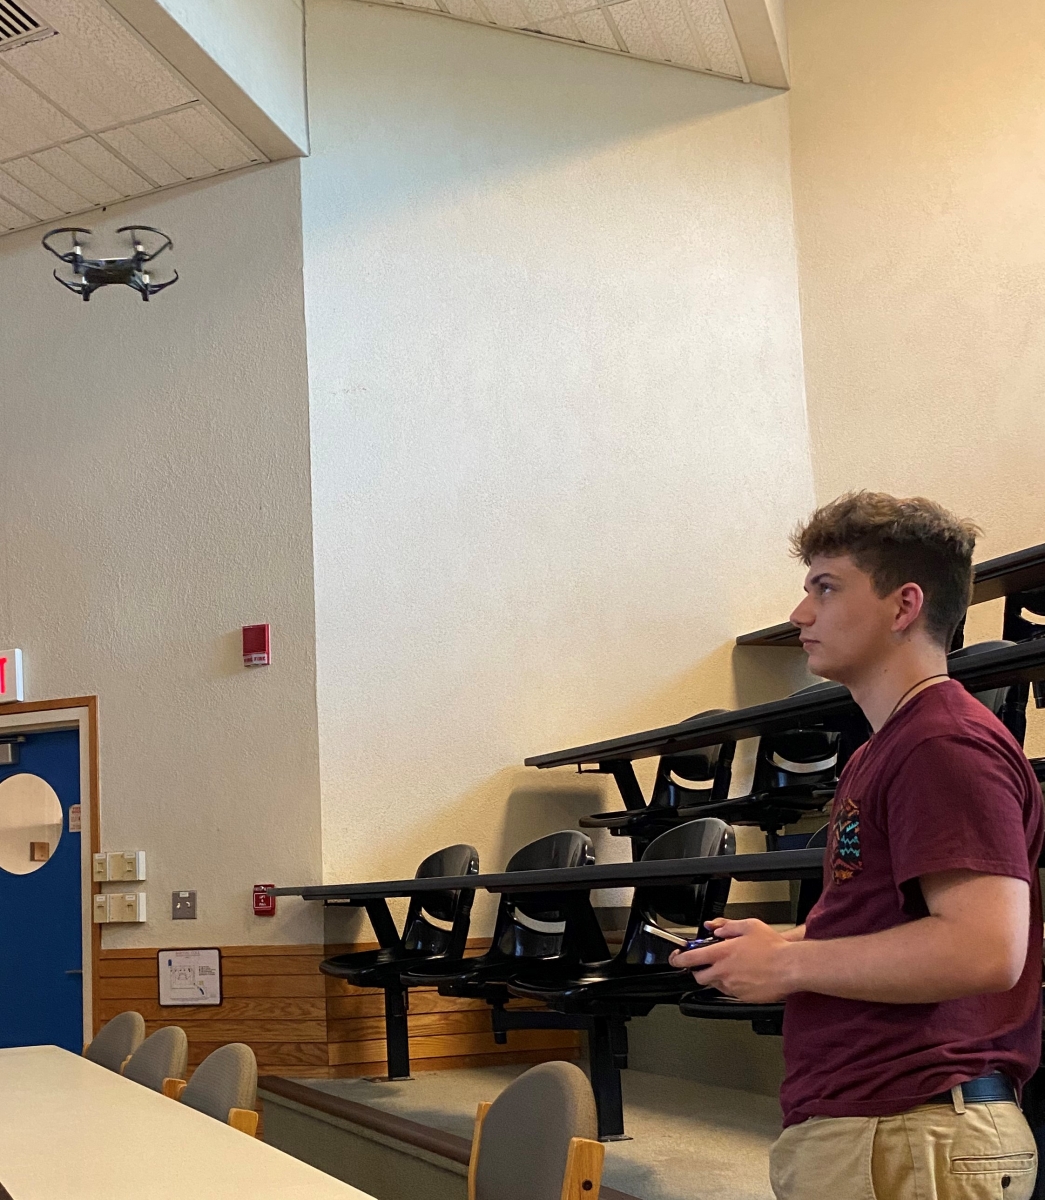 UNH Upward Bound student practices flying a drone in a classroom